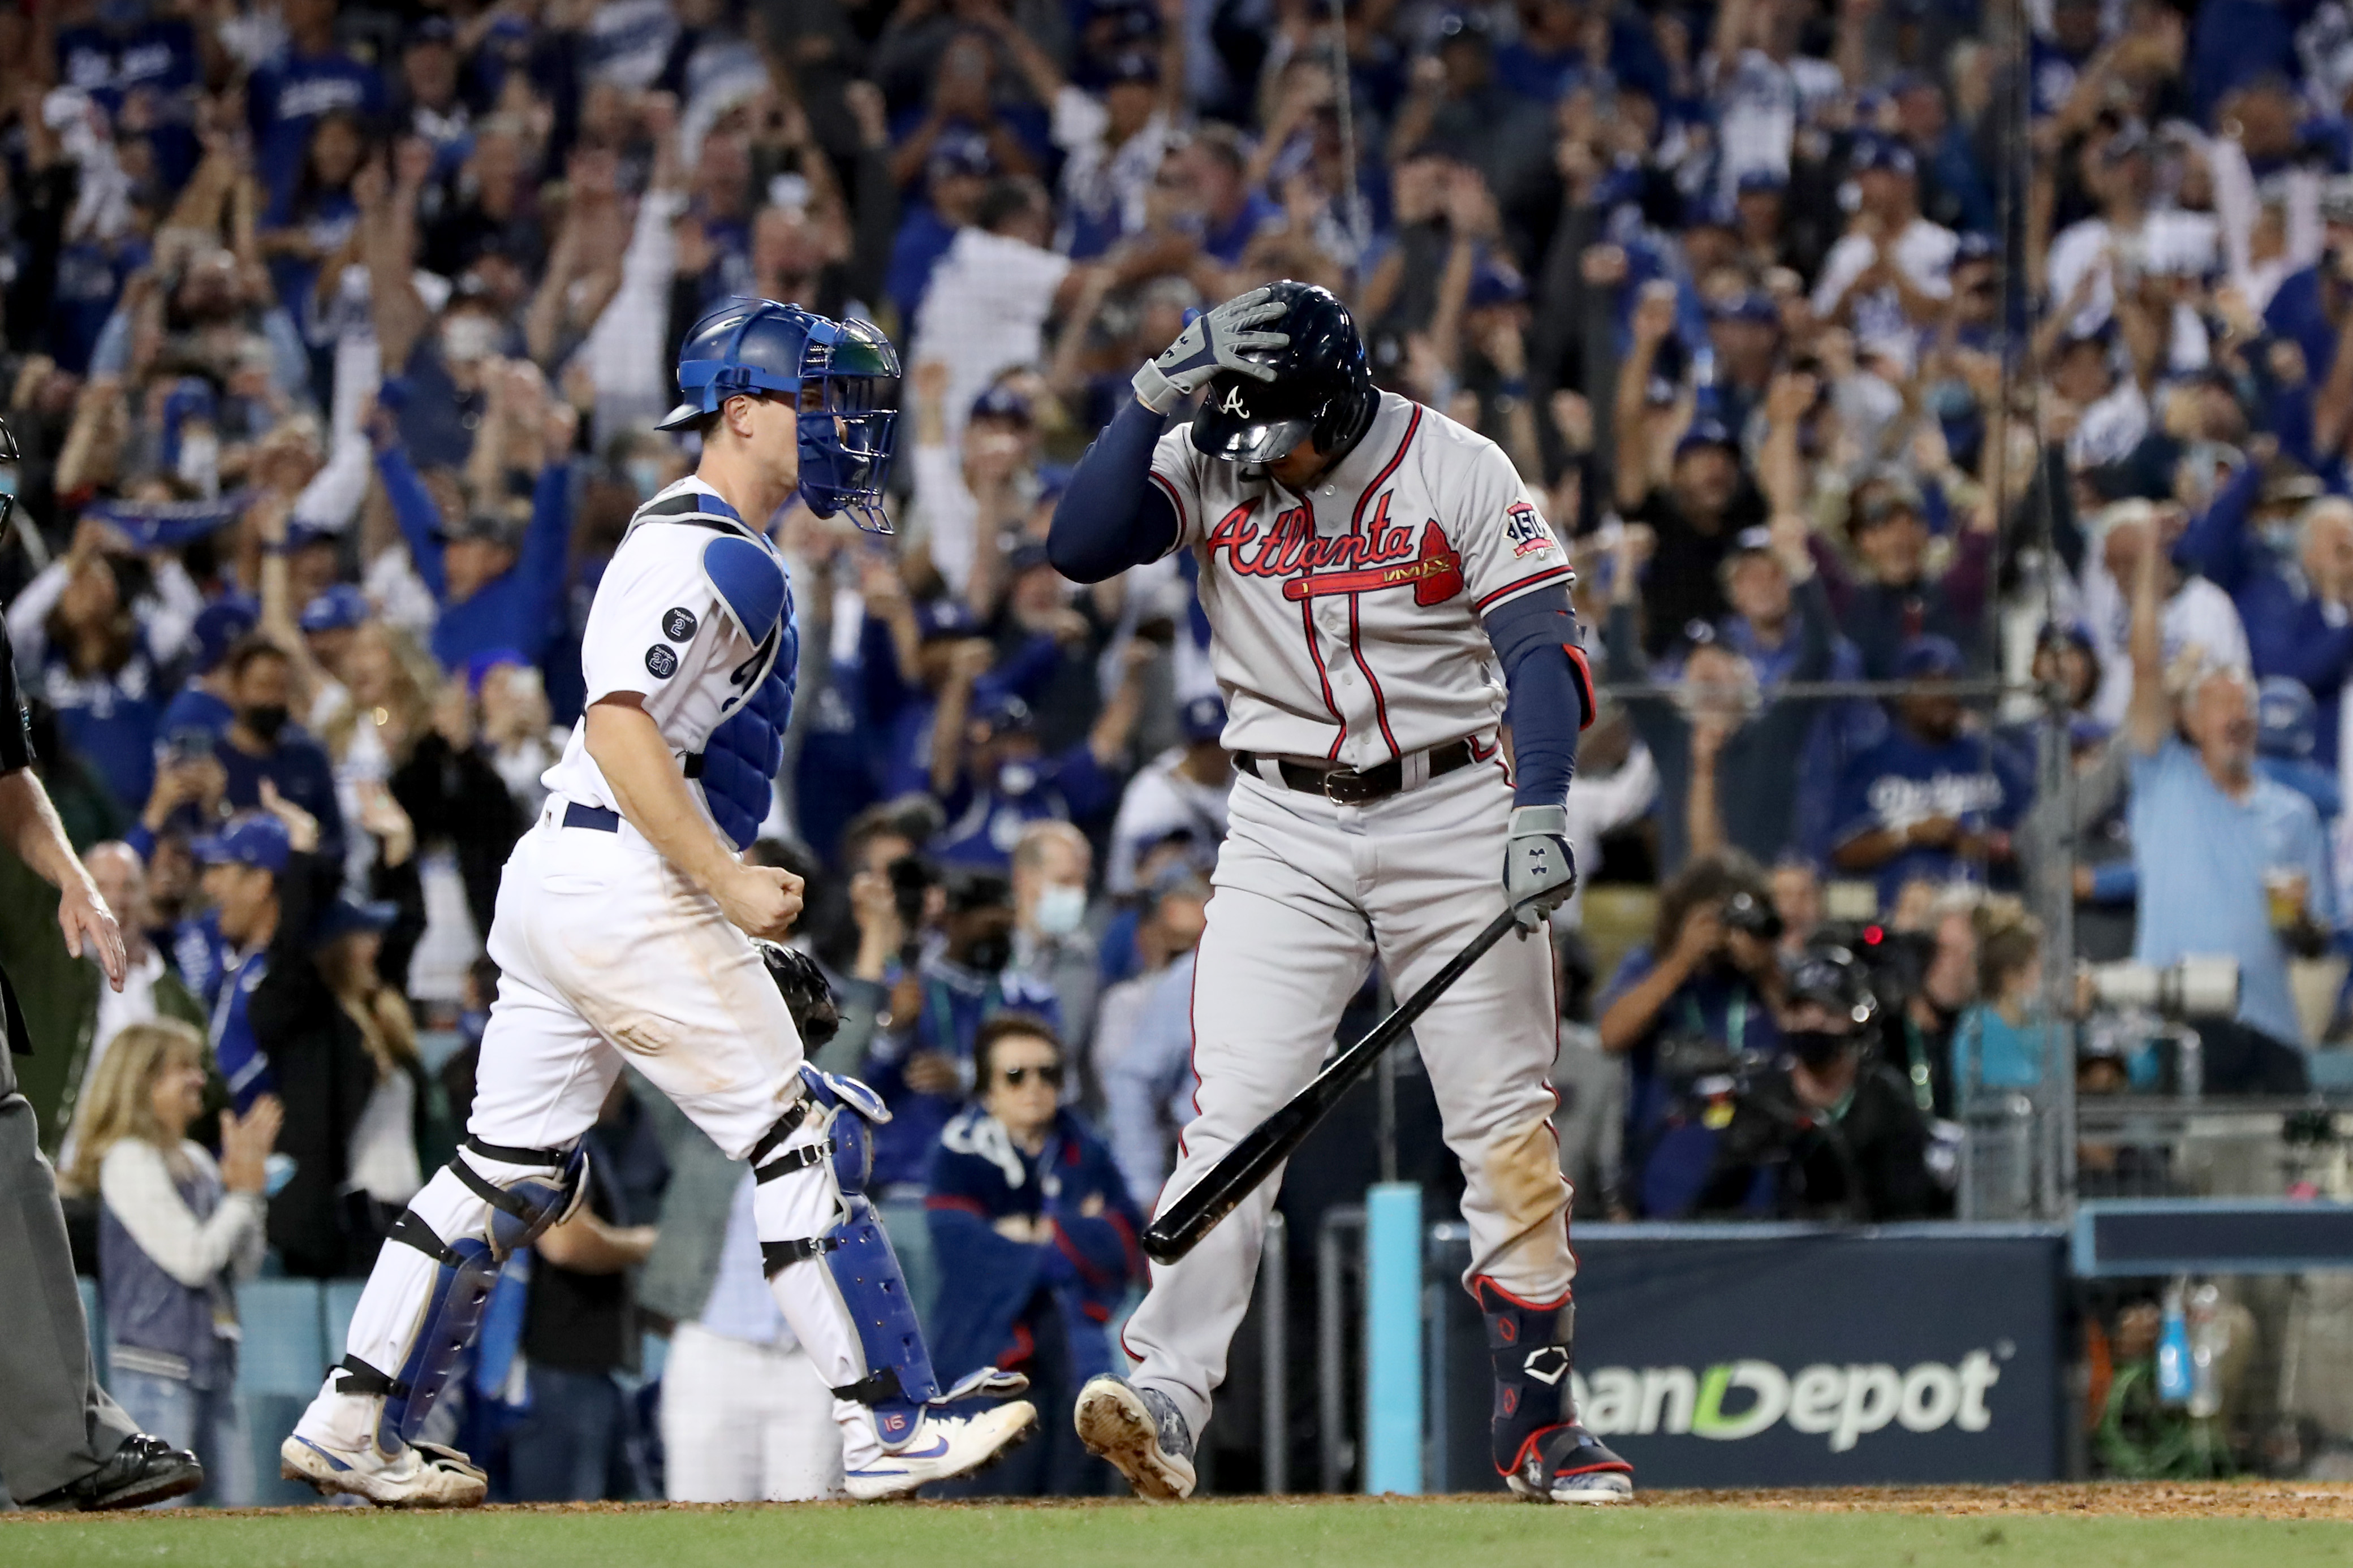 Freeman, Albies HR again, Braves hang on for 2-0 NLCS lead